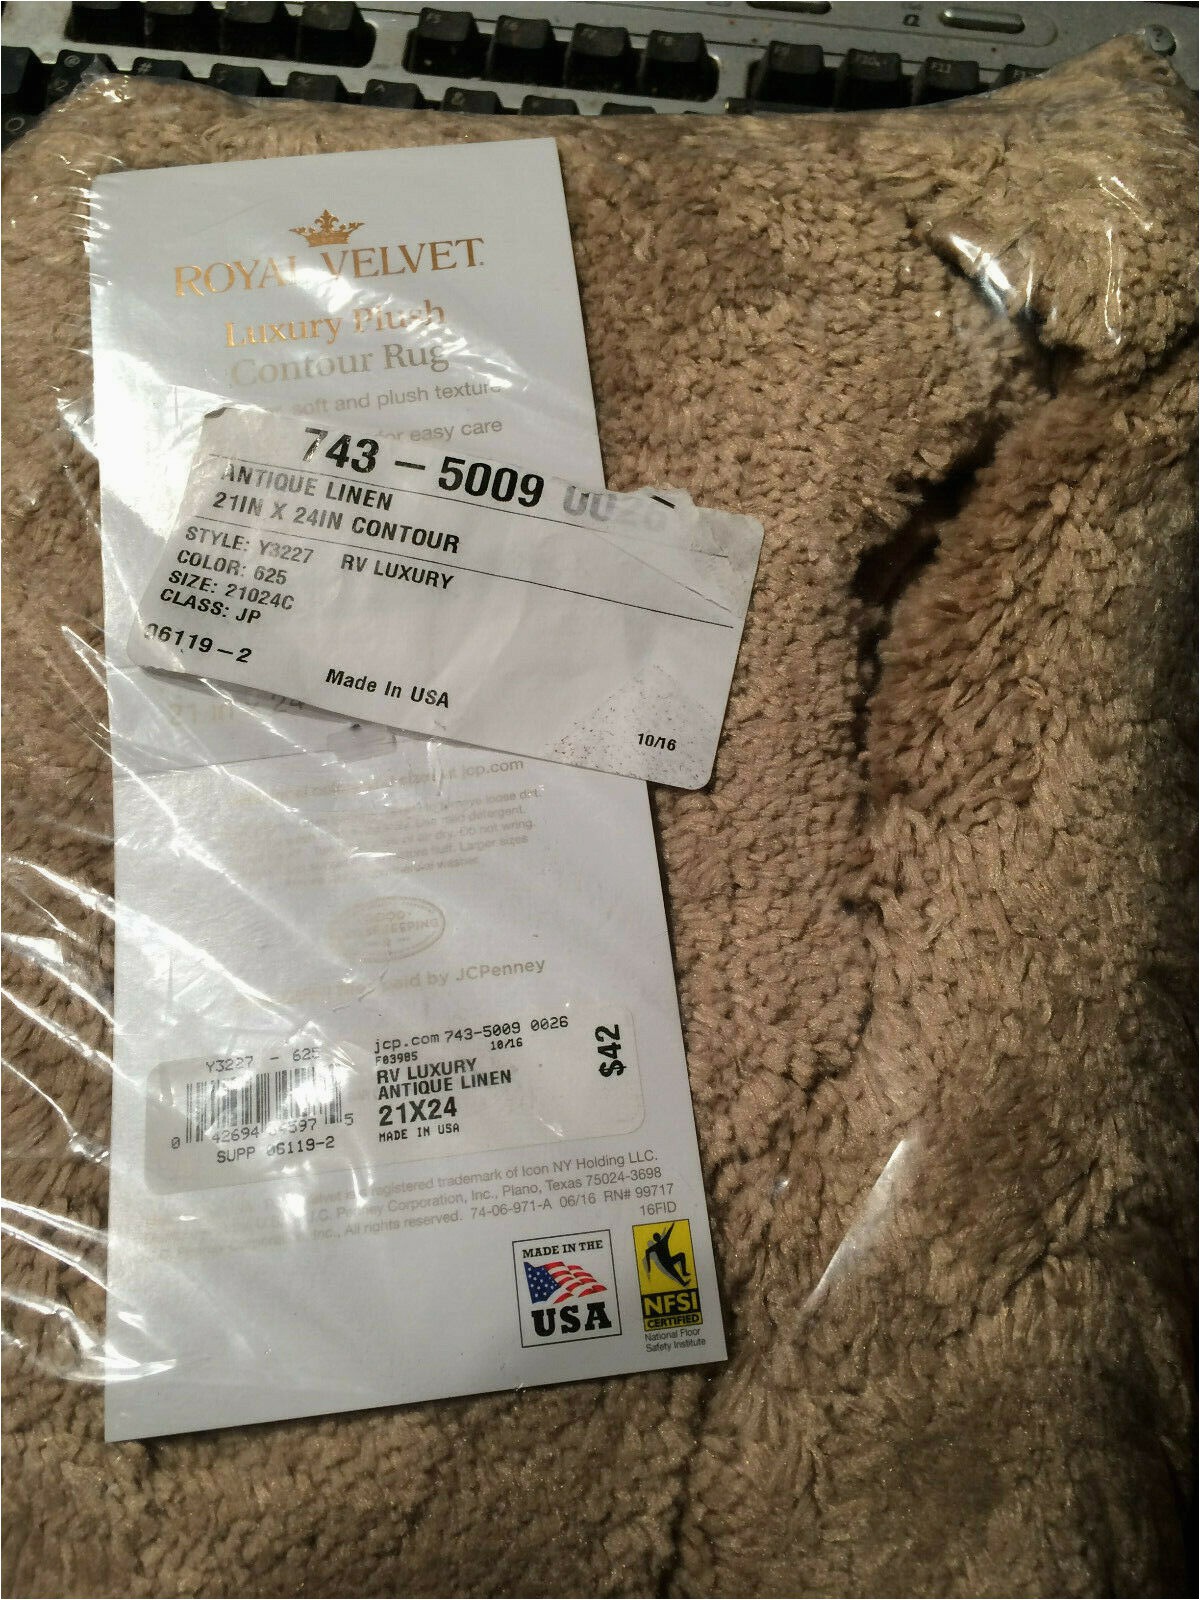 Jcpenney Contour Bath Rugs Royal Velvet Luxury Plush Contour Rug "antique Lineen" 21" X 24" New with Tags